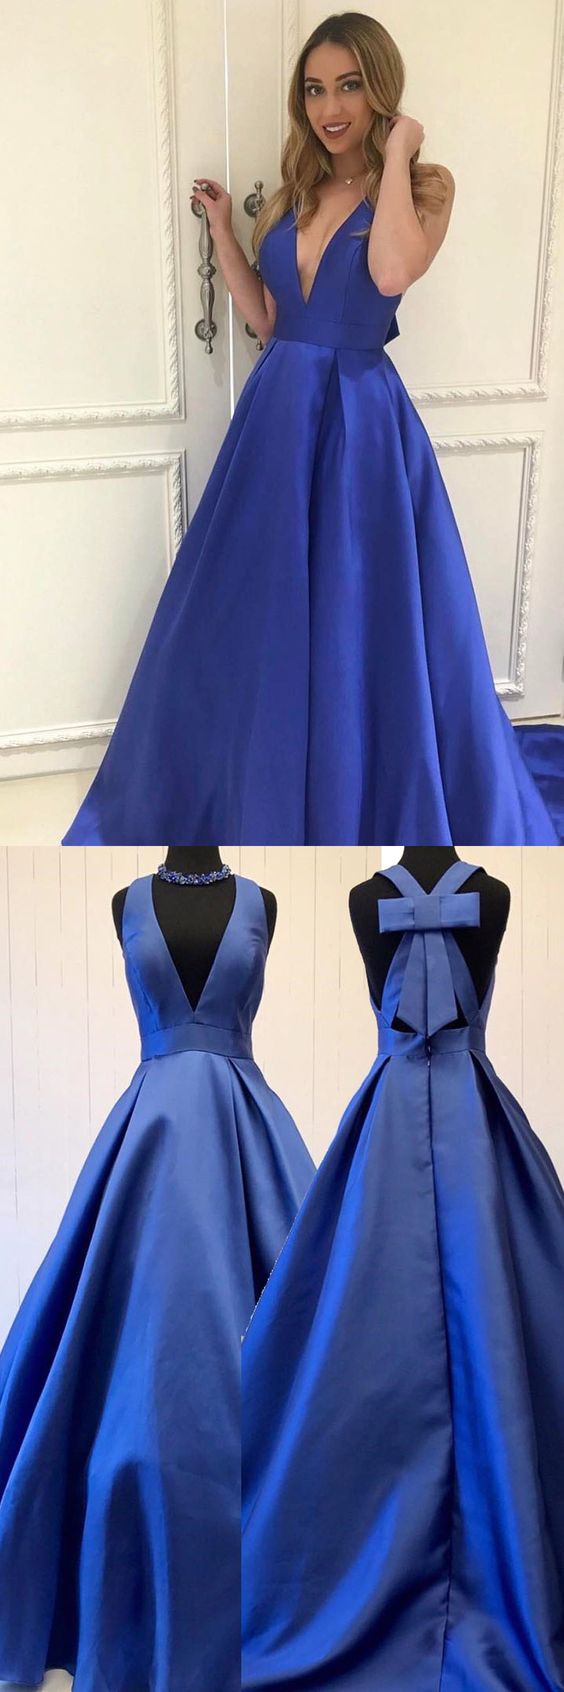 Royal Blue Plunge V Sleeveless Floor Length A-line Formal Dress Featuring Bow Accent Open Back, Prom Dress